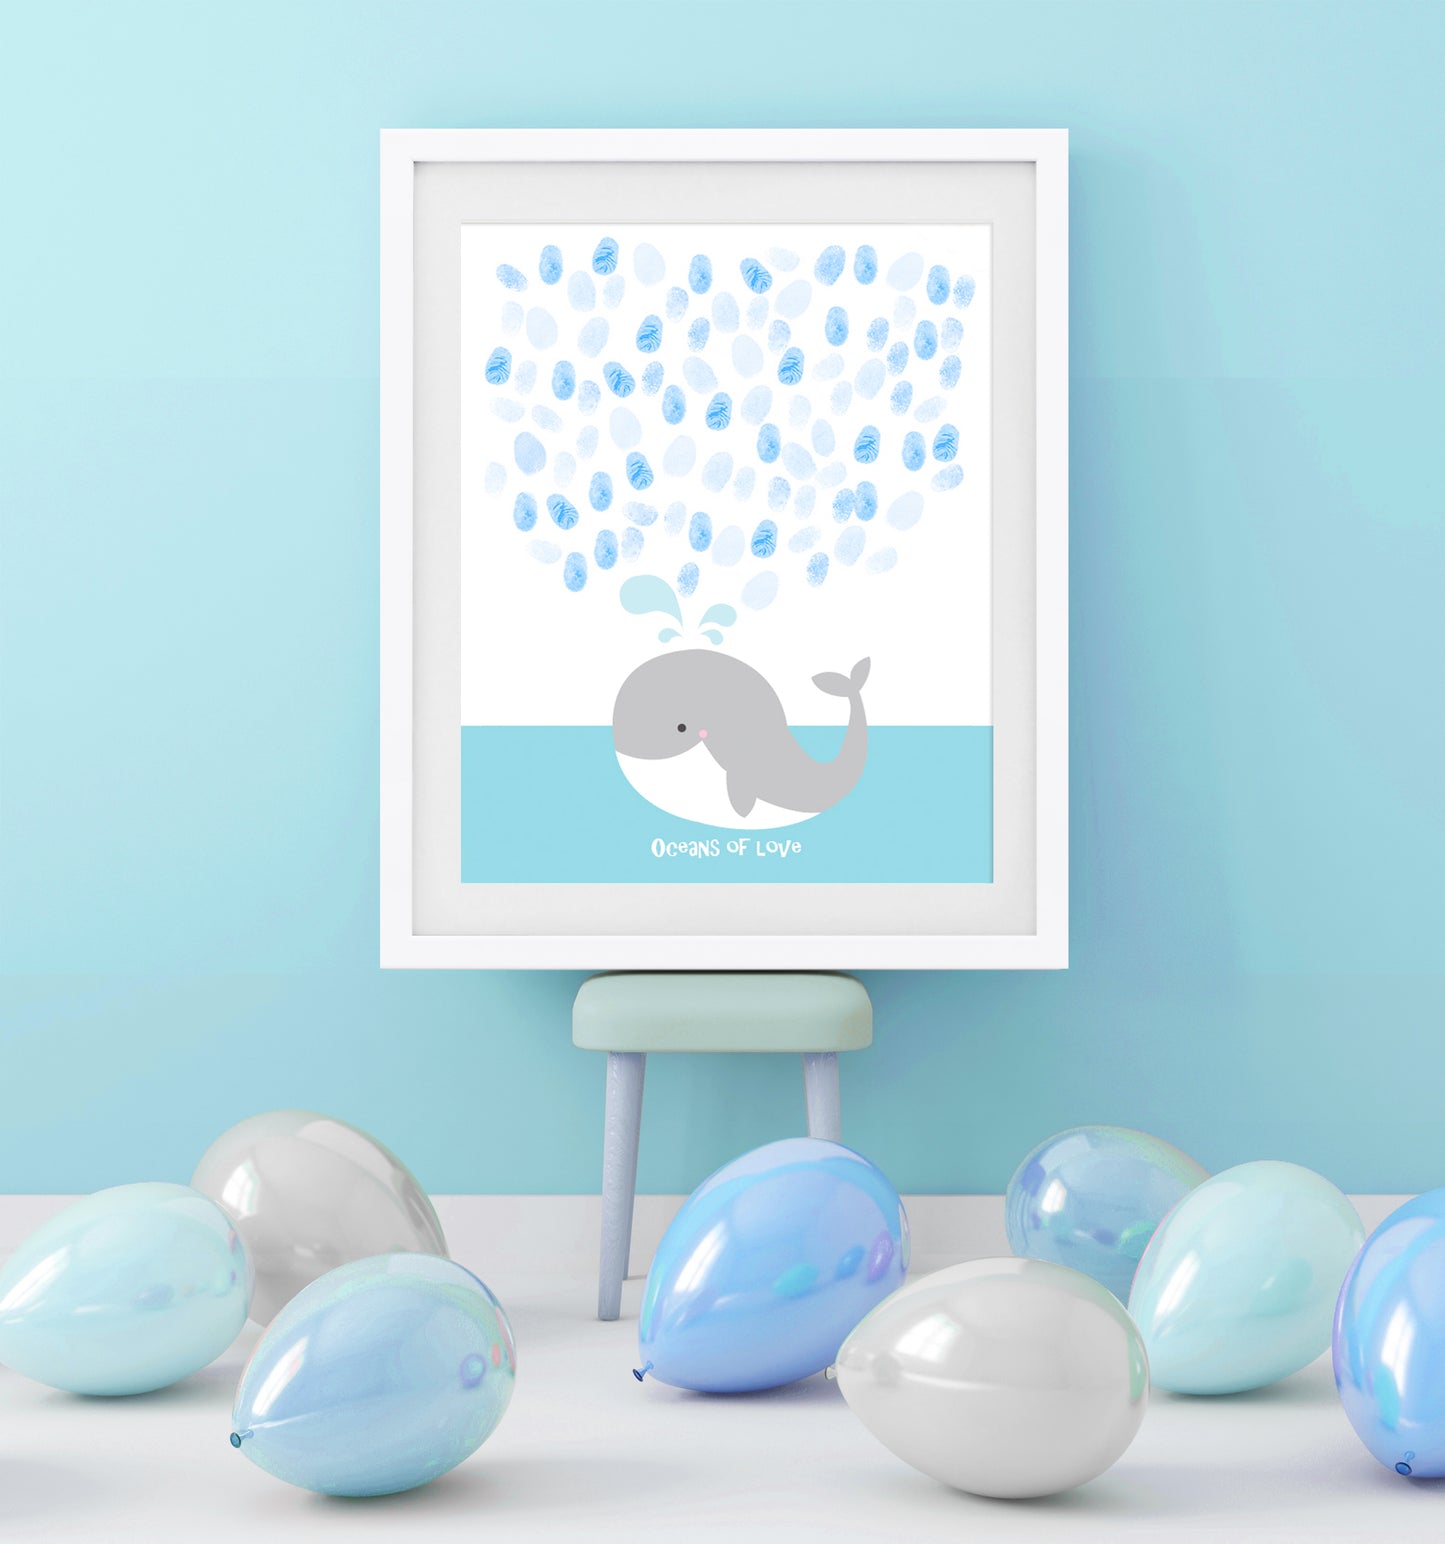 Guests fingerprints as water drops from a whale spout on a guest book poster at a party